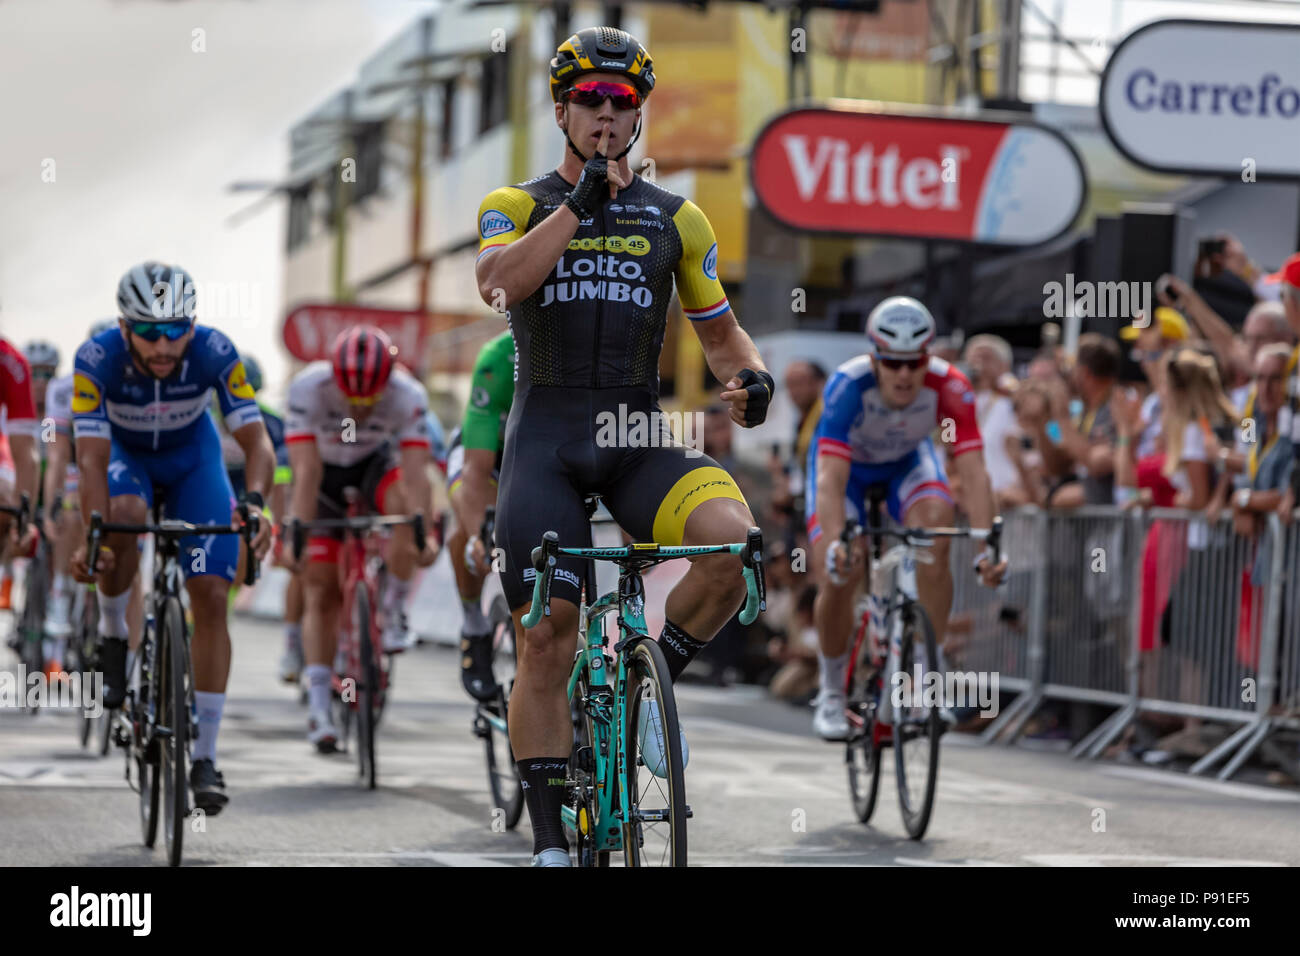 Chartres, France - July 13, 2018: The Dutch cyclist Dylan Groenewegen of LottoNL-Jumbo Team celebrates his victory in Chartres after the longest stage, Fougeres-Chartres, of Le Tour de France 2018. Credit: Radu Razvan/Alamy Live News Stock Photo